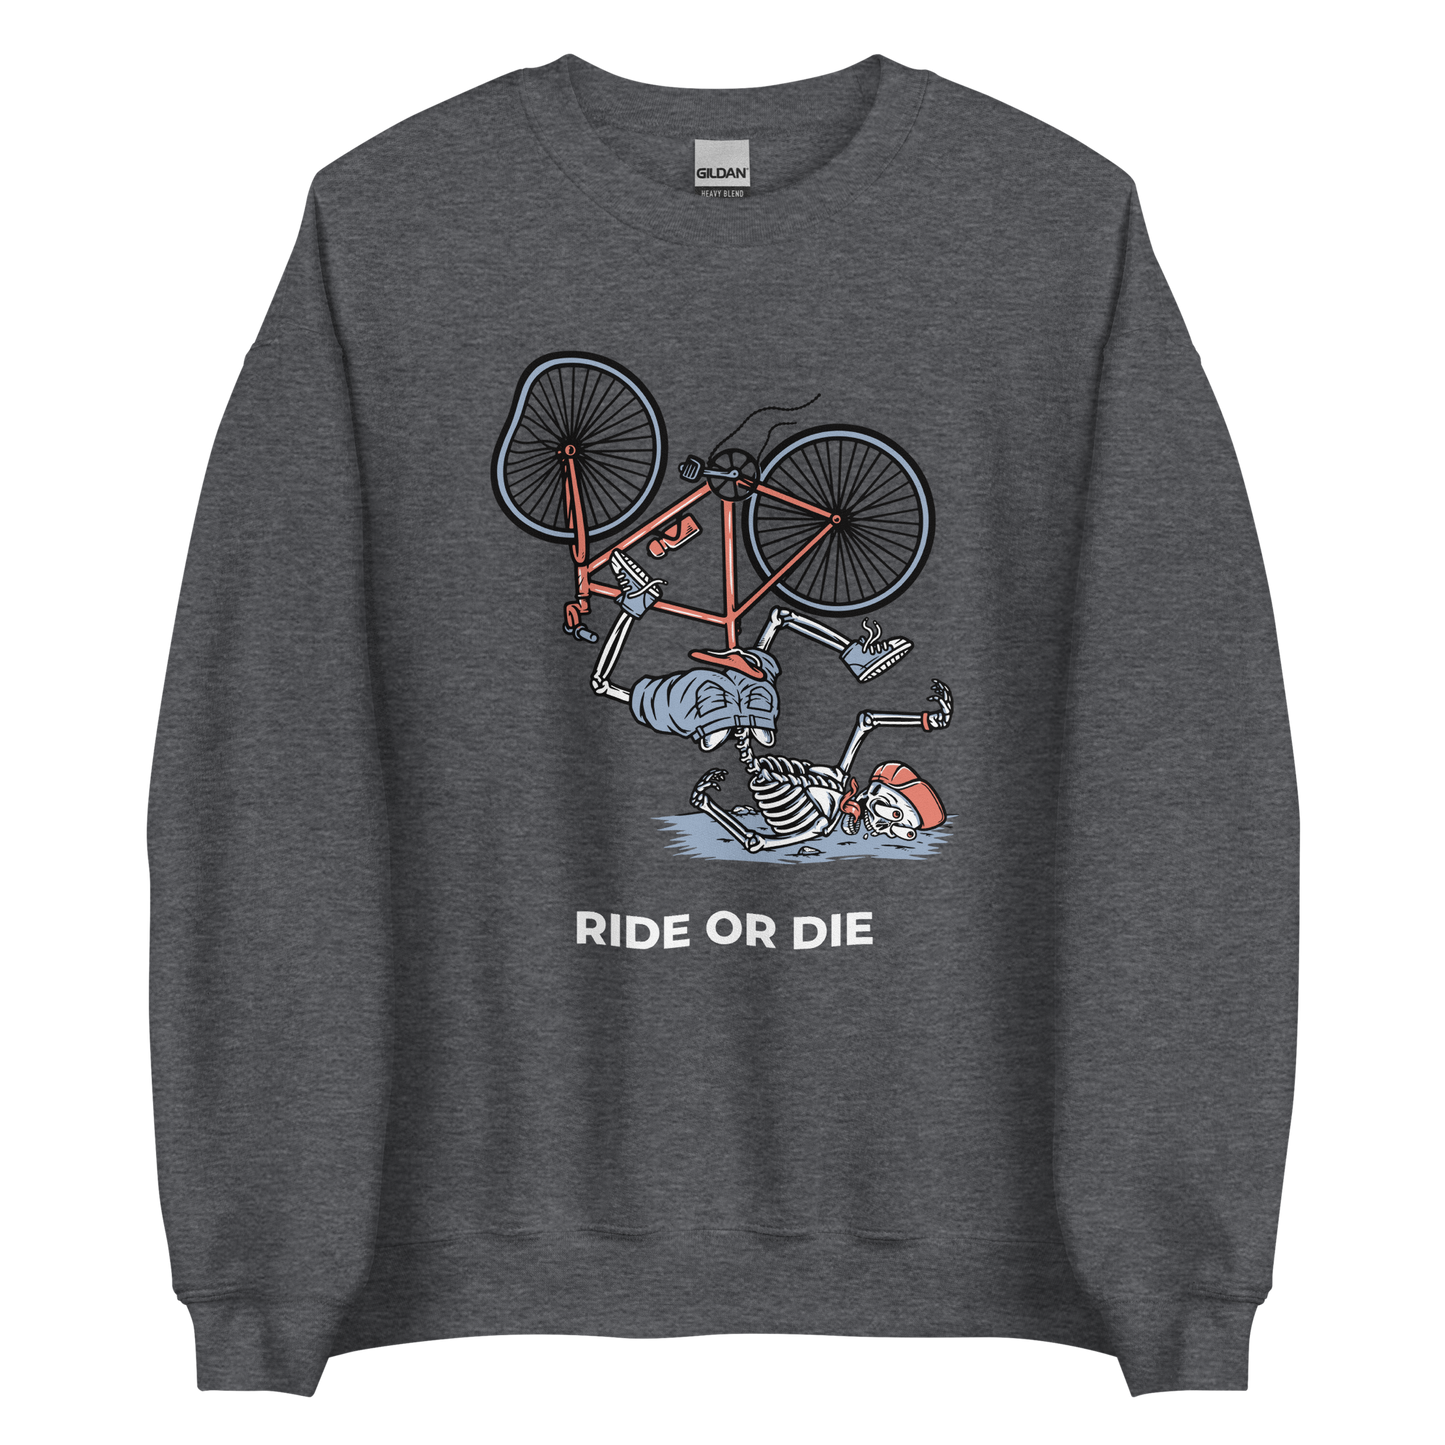 Dark Heather Ride or Die Sweatshirt featuring a bold Skeleton Falling While Riding a Bicycle graphic on the chest - Funny Graphic Skeleton Sweatshirts - Boozy Fox